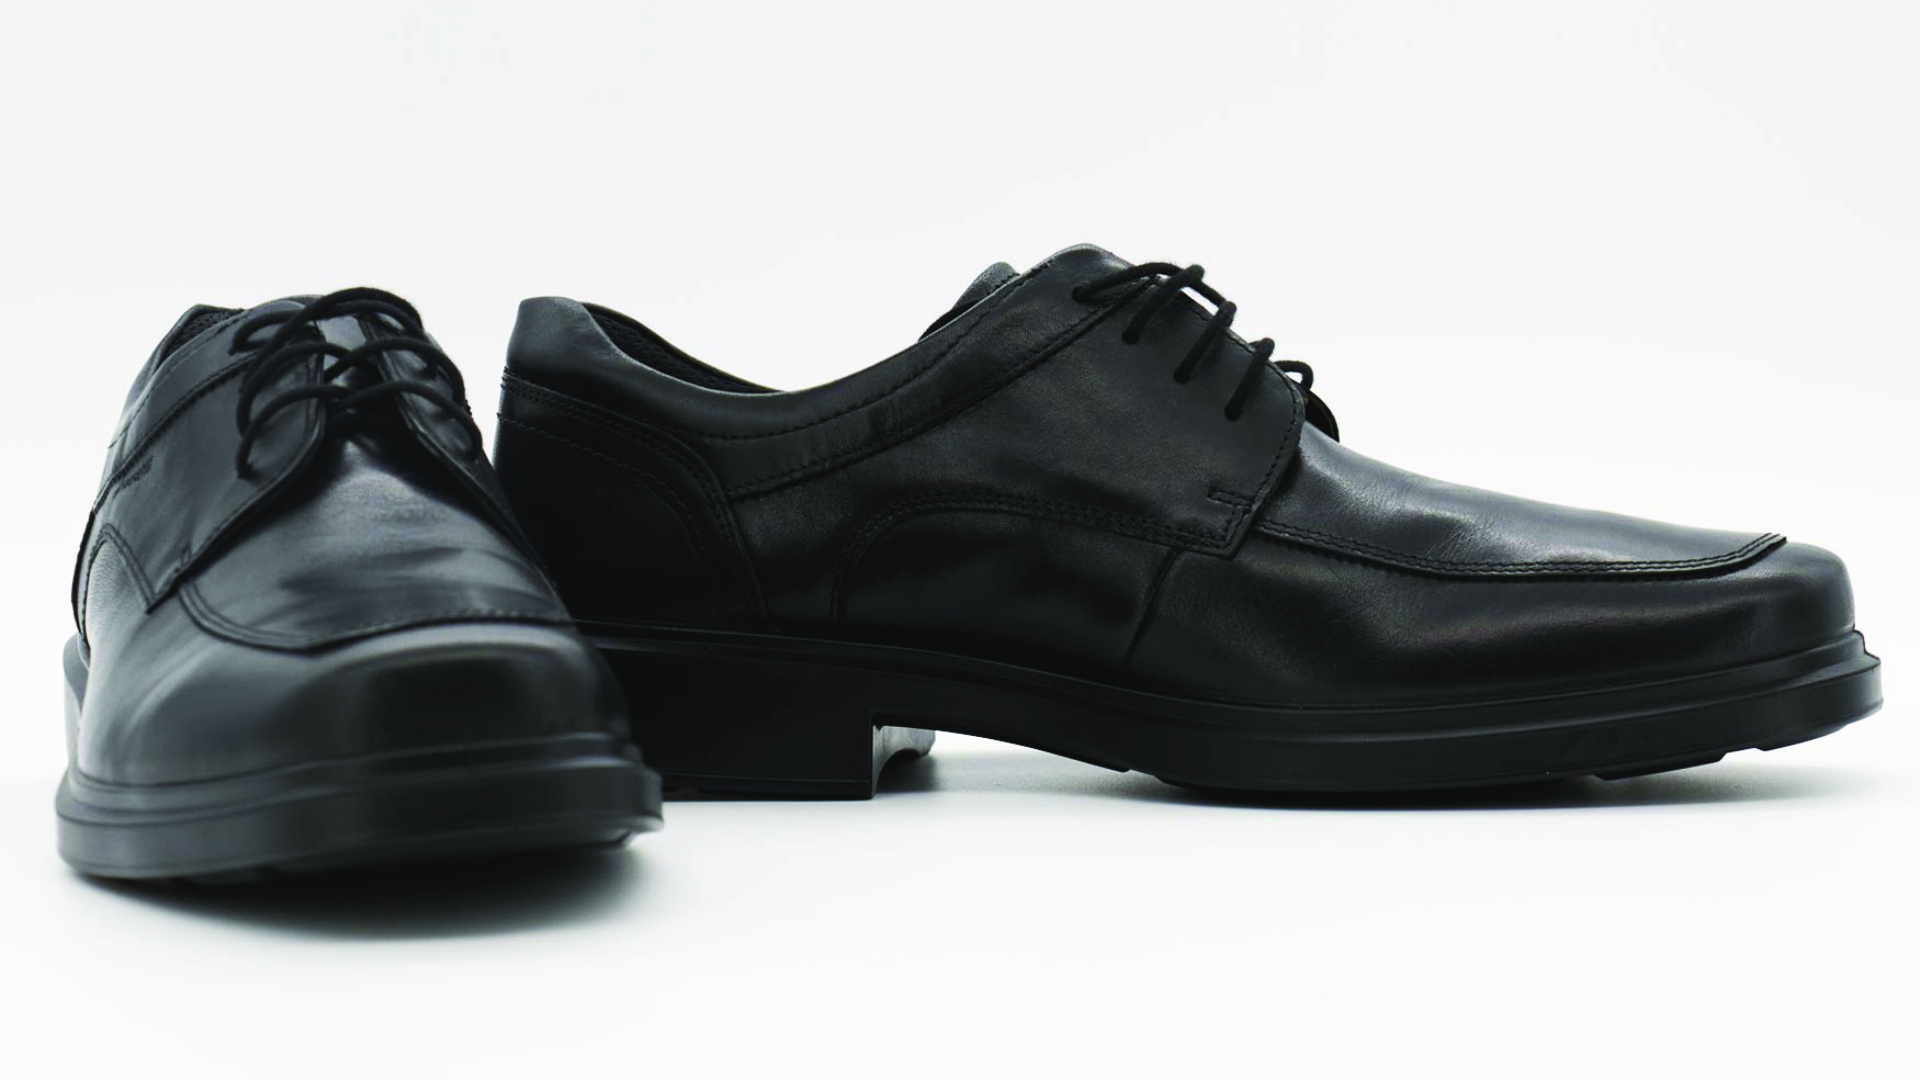 A pair of Ecco Helsinki 2 smart shoes, perfect for working professionals looking to improve their posture and reduce knee pain while maintaining a professional look, as recommended by shoefit.uk.